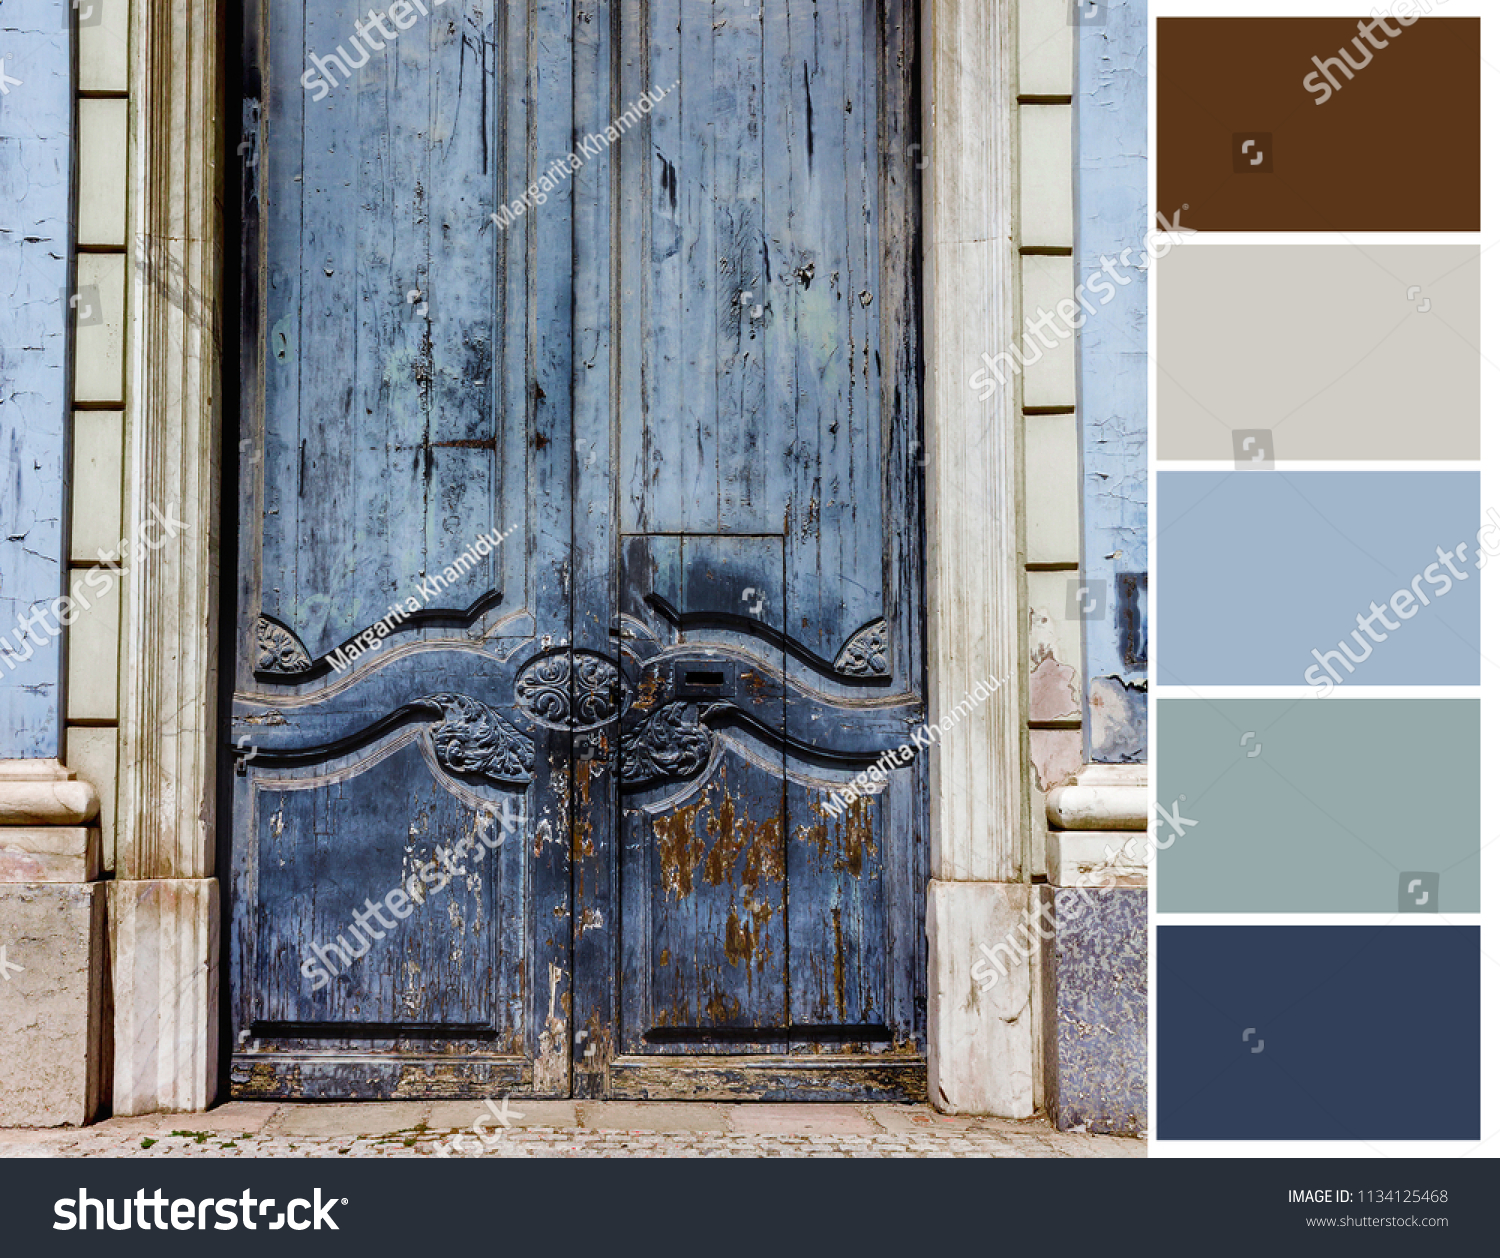 Color palette. Color theory and mixing. Vintage door background. #1134125468